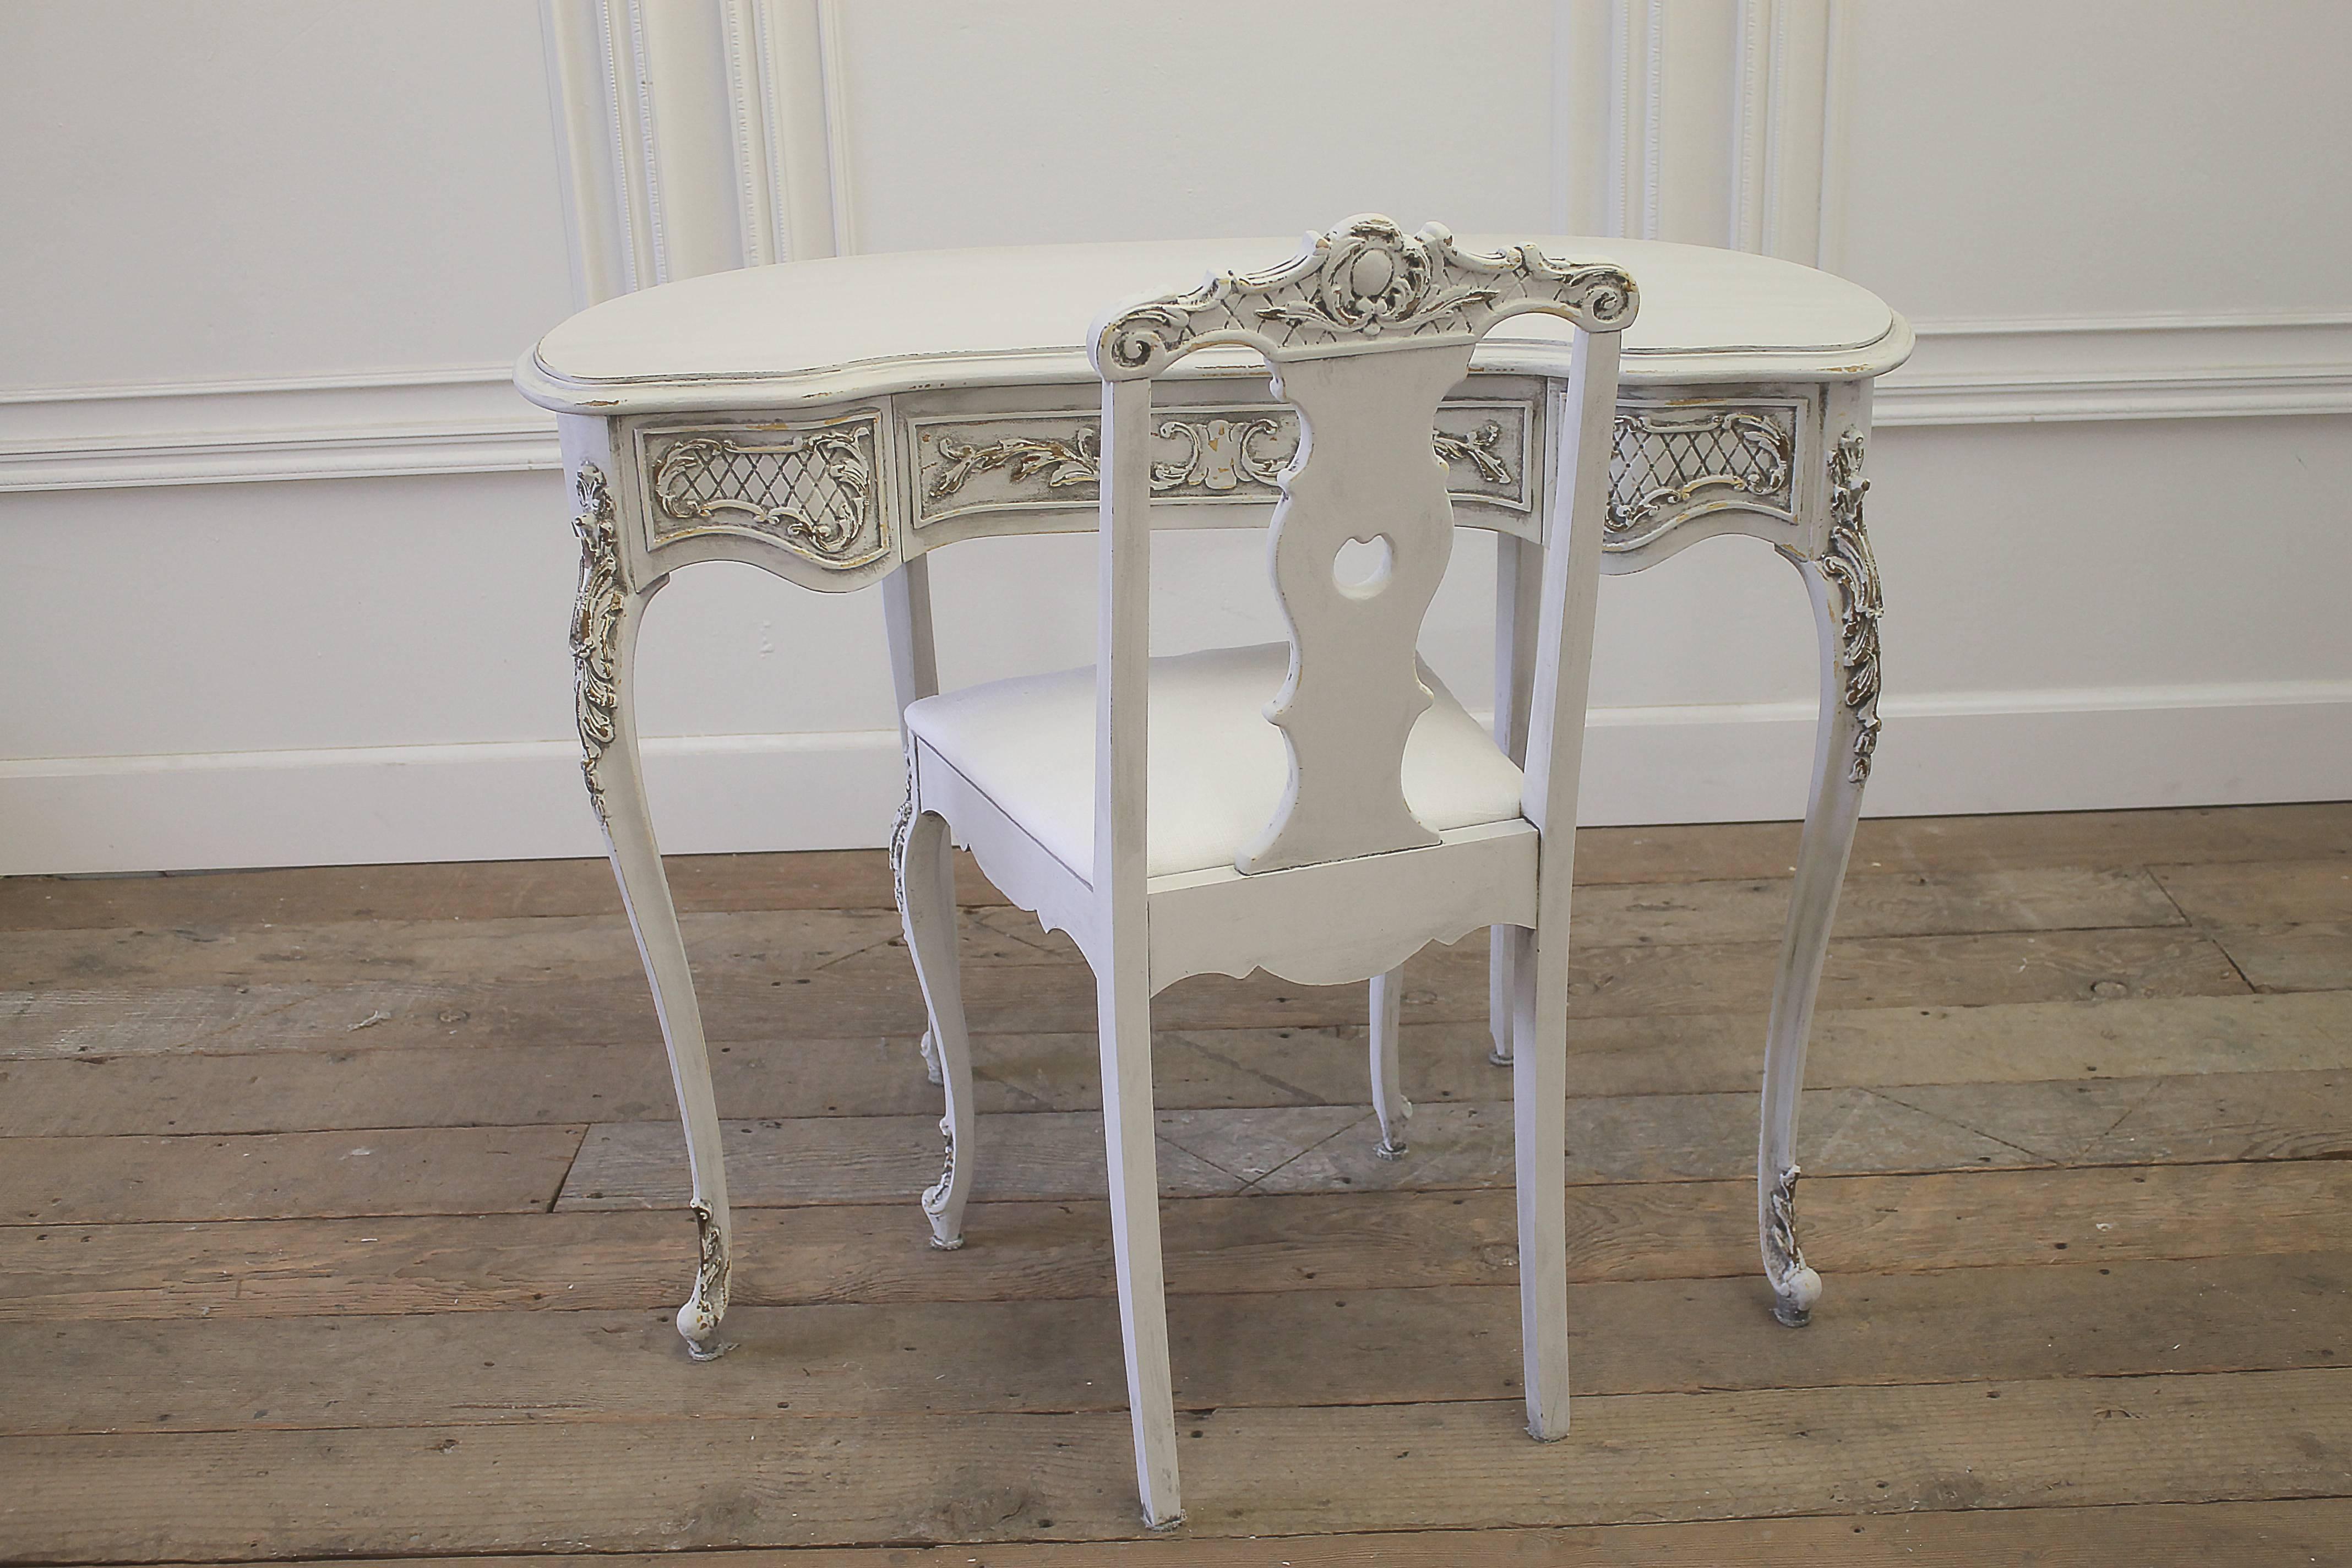 Exquisite French vanity and chair in the Louis XV style. Freshly painted in our signature oyster white paint, and the chair has been reupholstered in a heavy soft white Belgian linen.
The vanity has a single working drawer in the center.